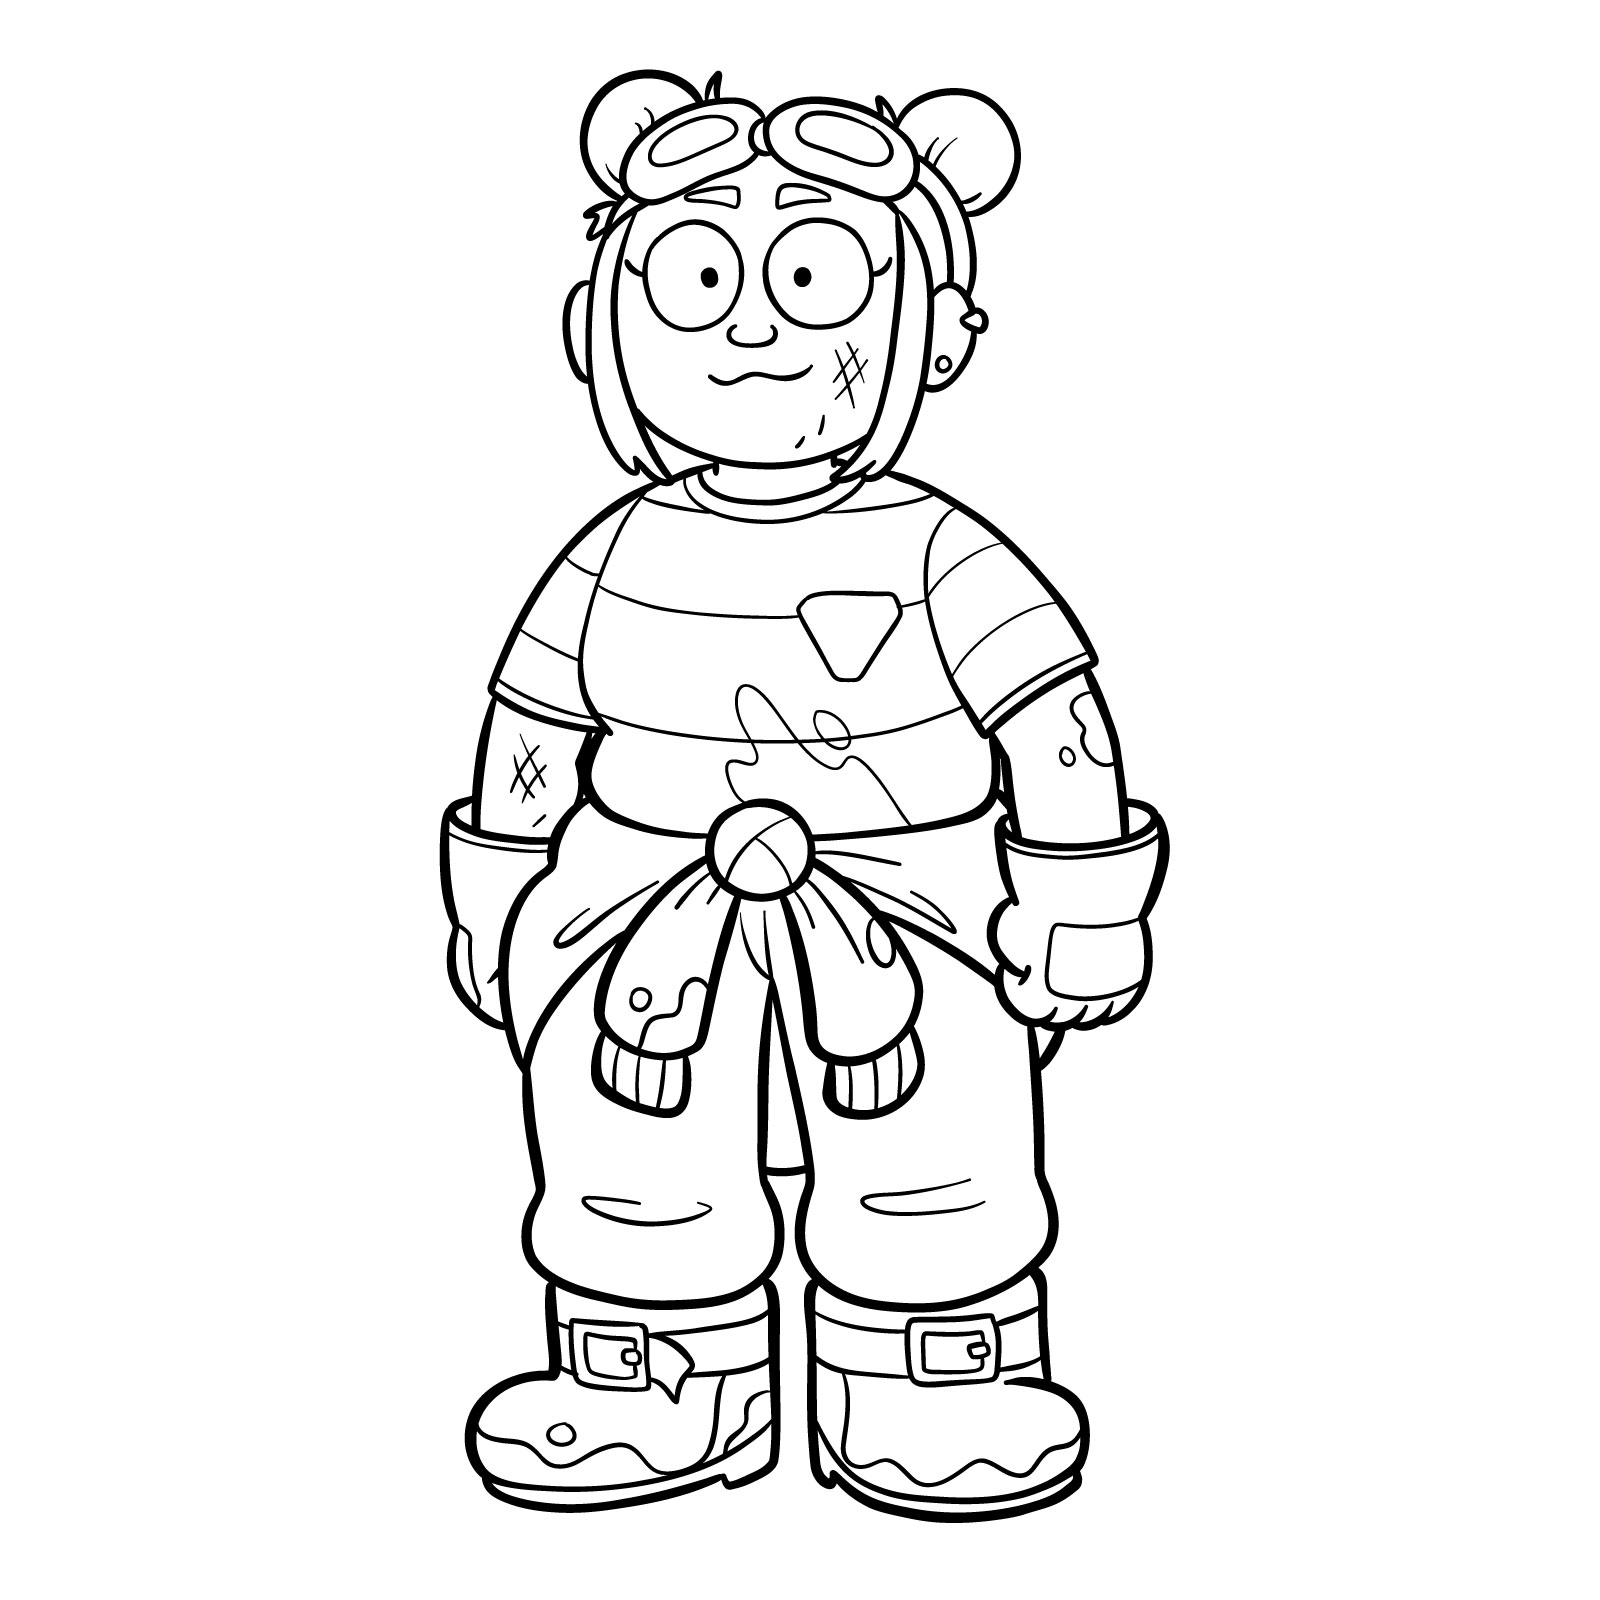 How to draw Jess from Amphibia - final step